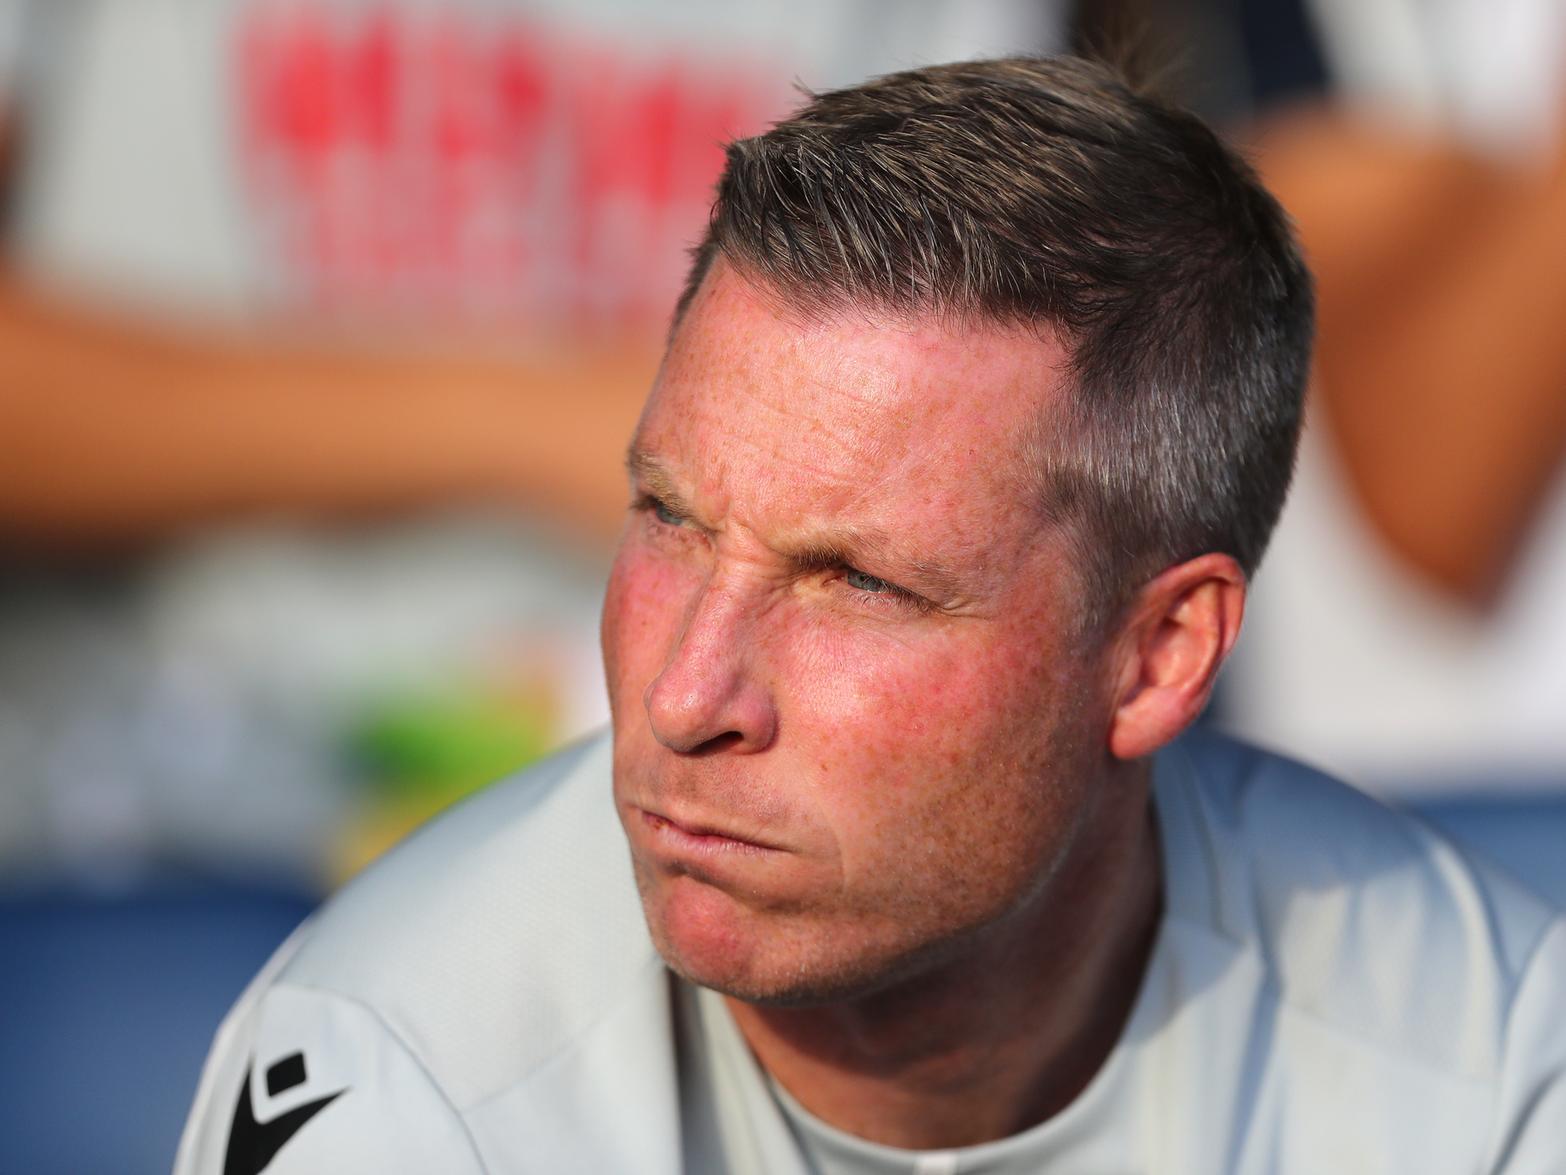 Cardiff City's new boss Neil Harris has revealed that he's targetinga push towards the play-off places, and has claimed he'll be looking to bring attacking football to the club. (Wales Online)